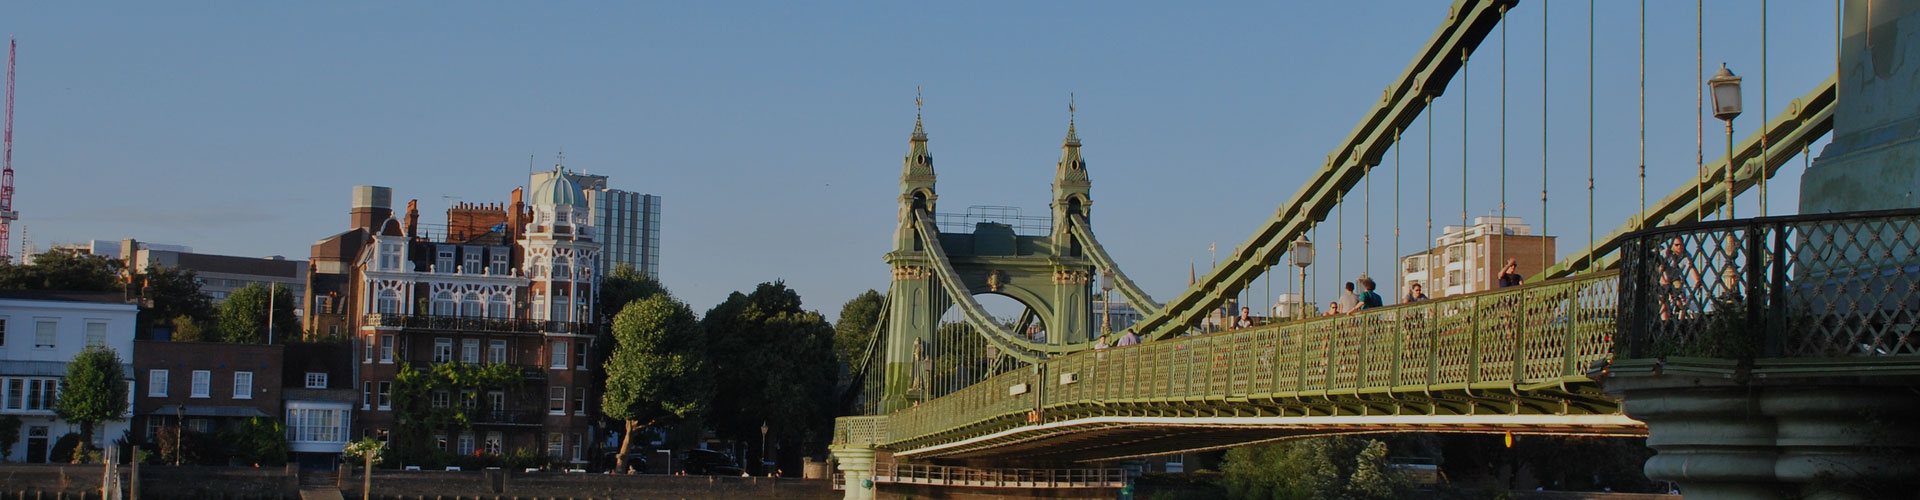 Hammersmith Bridge Stabilisation And What It Means For Residents